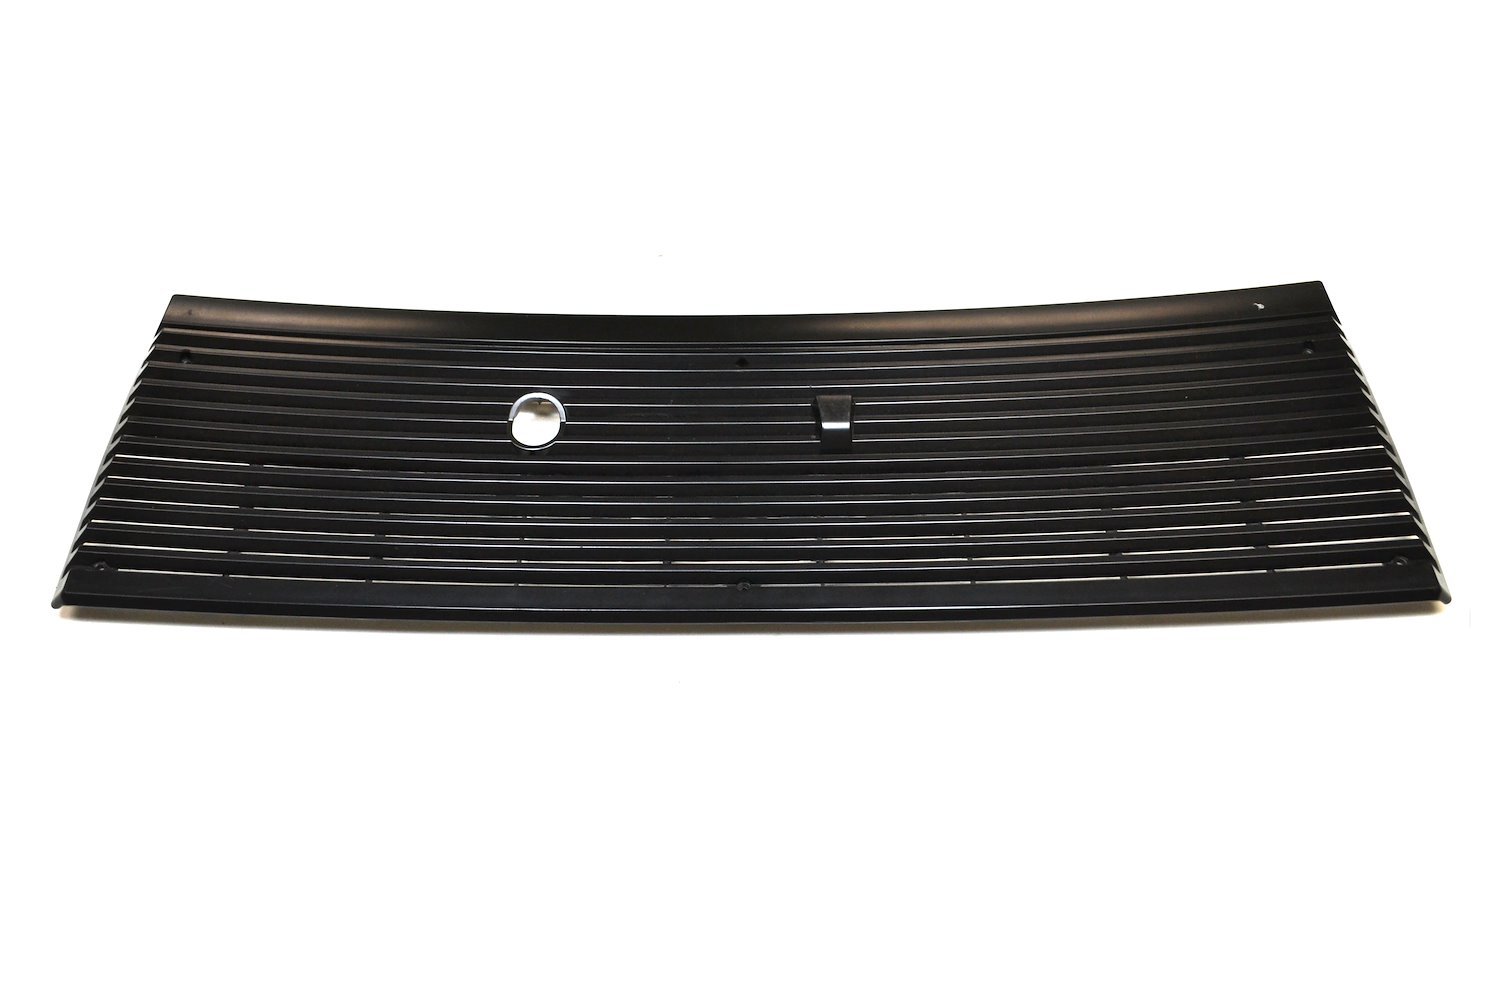 F4027 Cowl Grille Fits 1983-1993 Ford Mustang